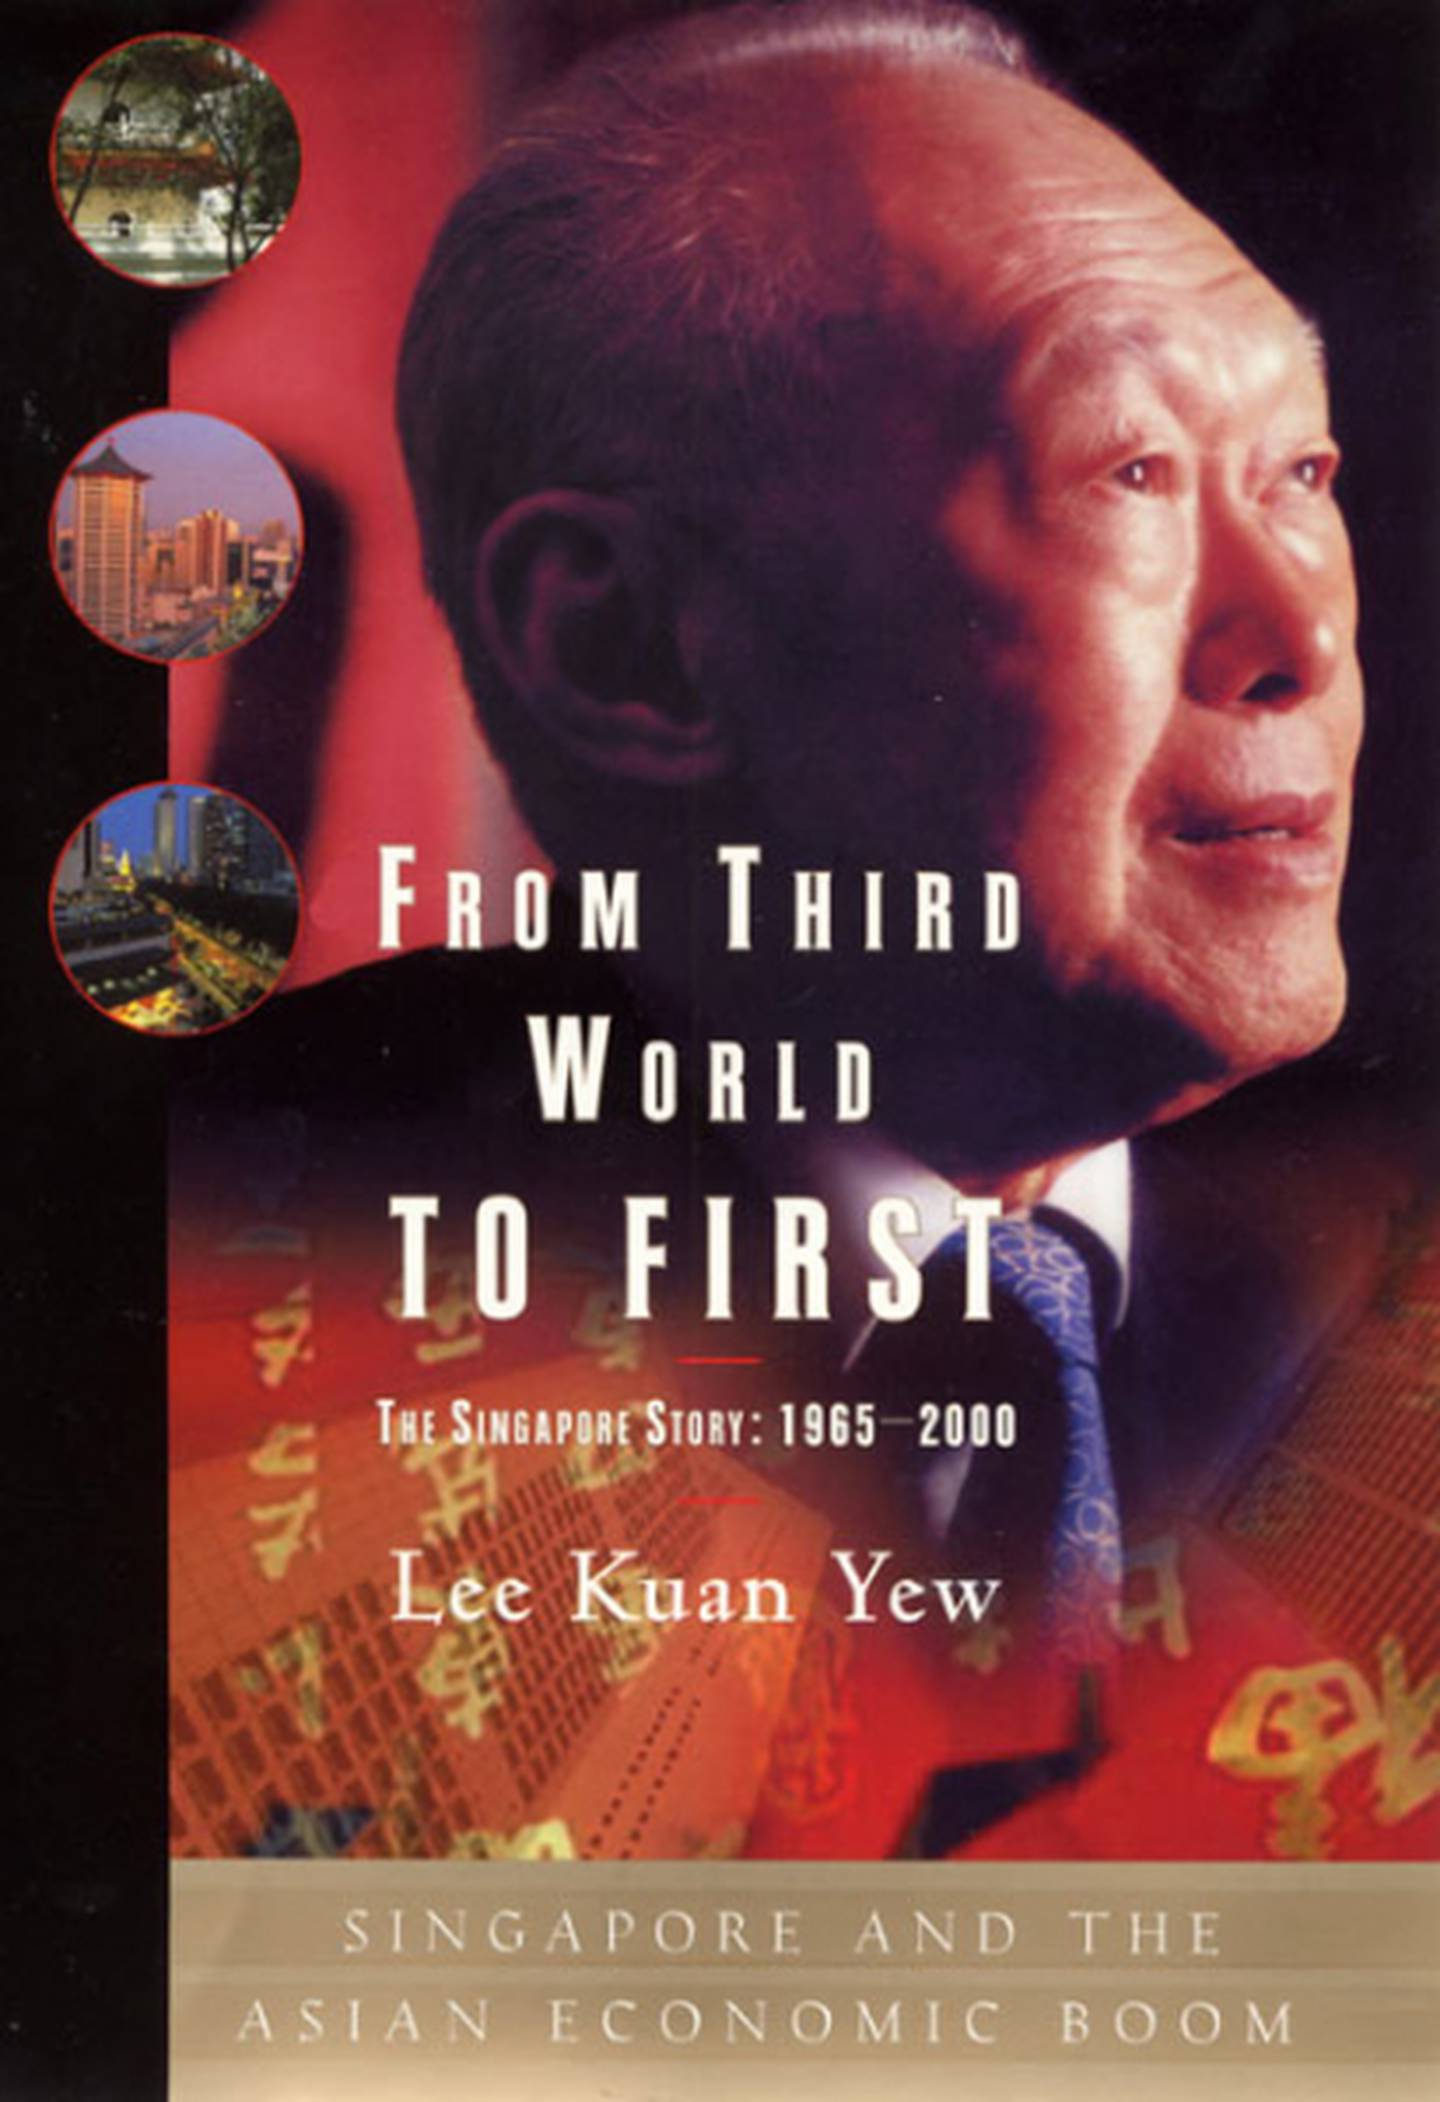 A handout book cover image of "From Third World to FirstThe Singapore Story: 1965-2000" by Lee Kuan Yew (Courtesy: HarperCollins) *** Local Caption ***  al24jl-ueareads-bhatia04.jpg